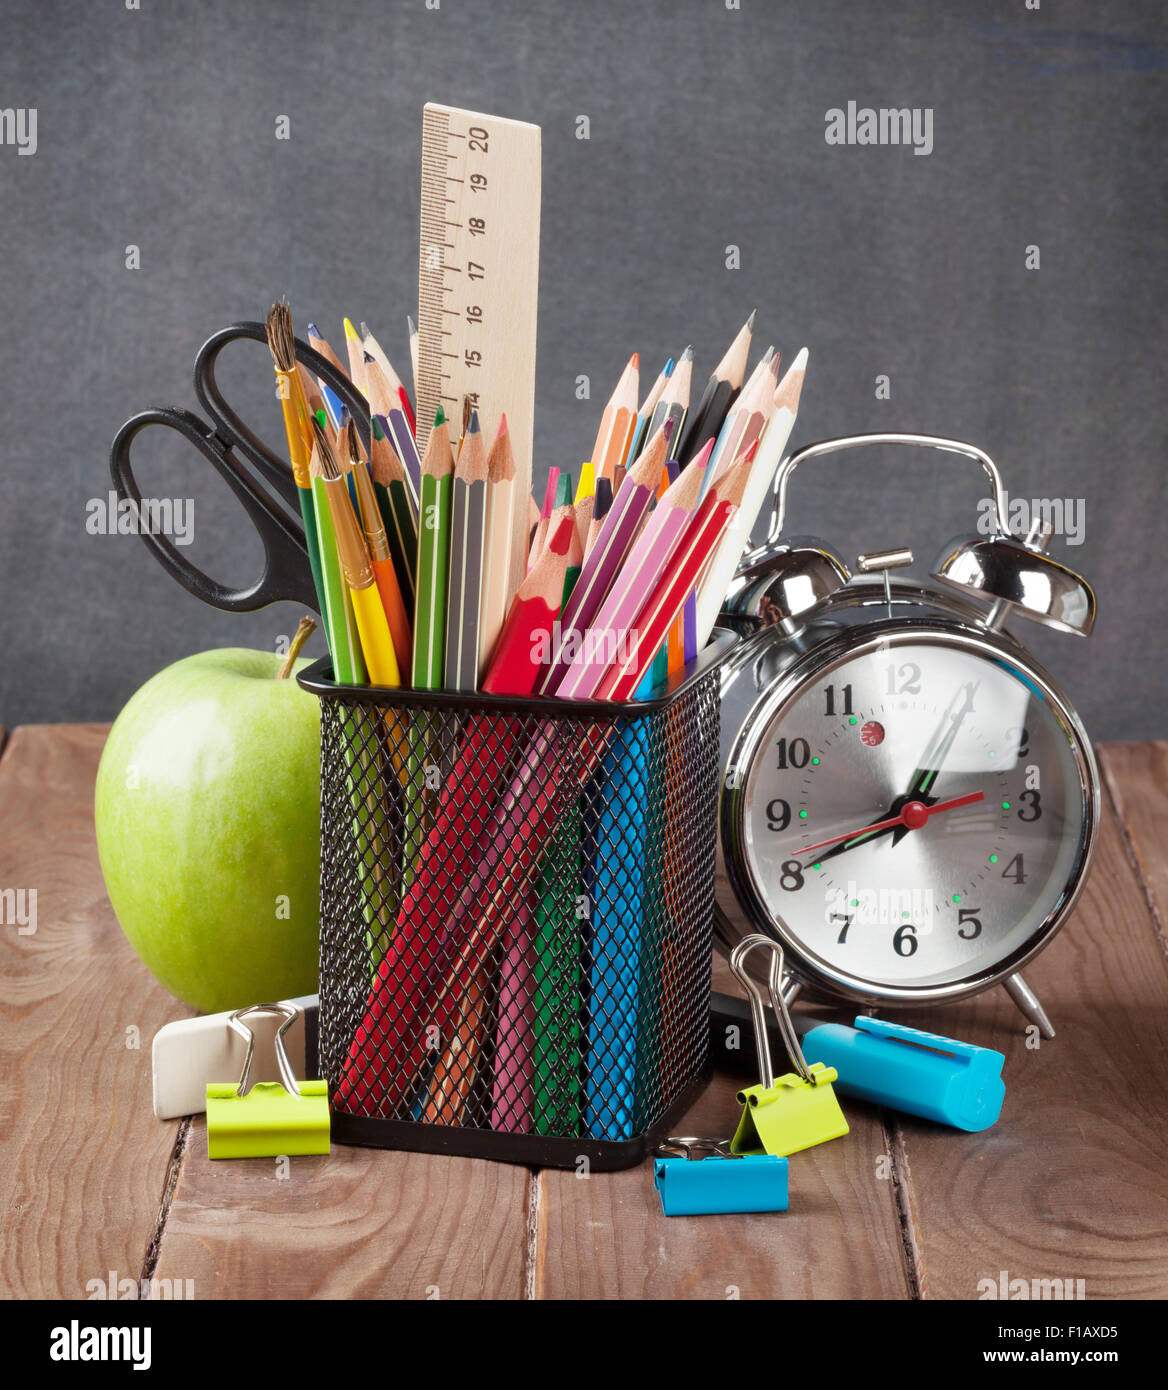 School and office supplies, alarm clock and apple on classroom table Stock Photo